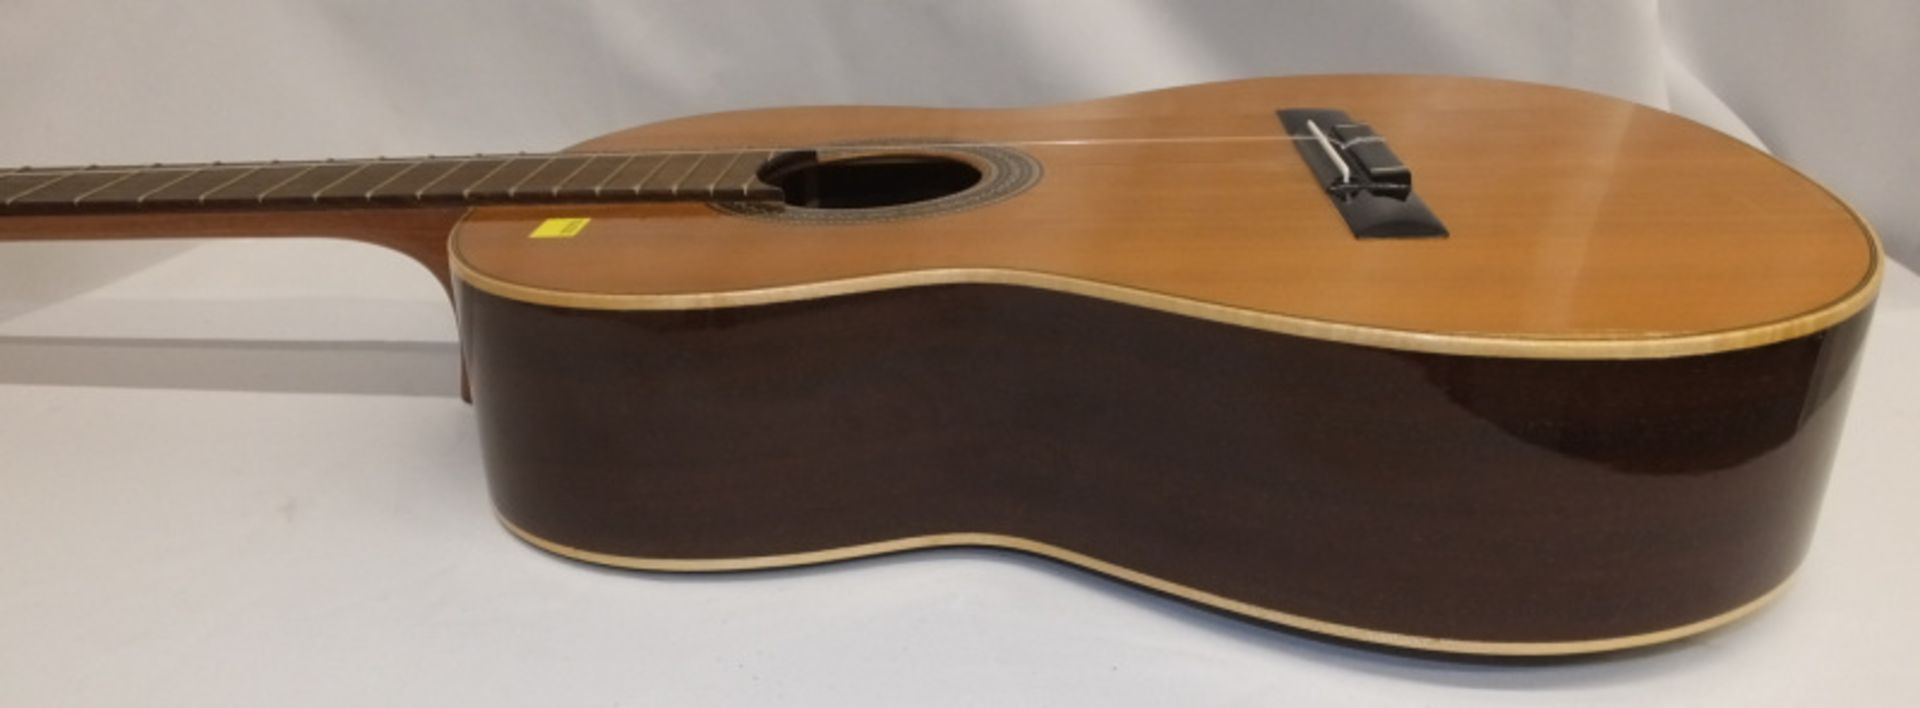 Vicente Sanchis Constructor 28s Acoustic Guitar in case (needs new strings) - Image 7 of 13